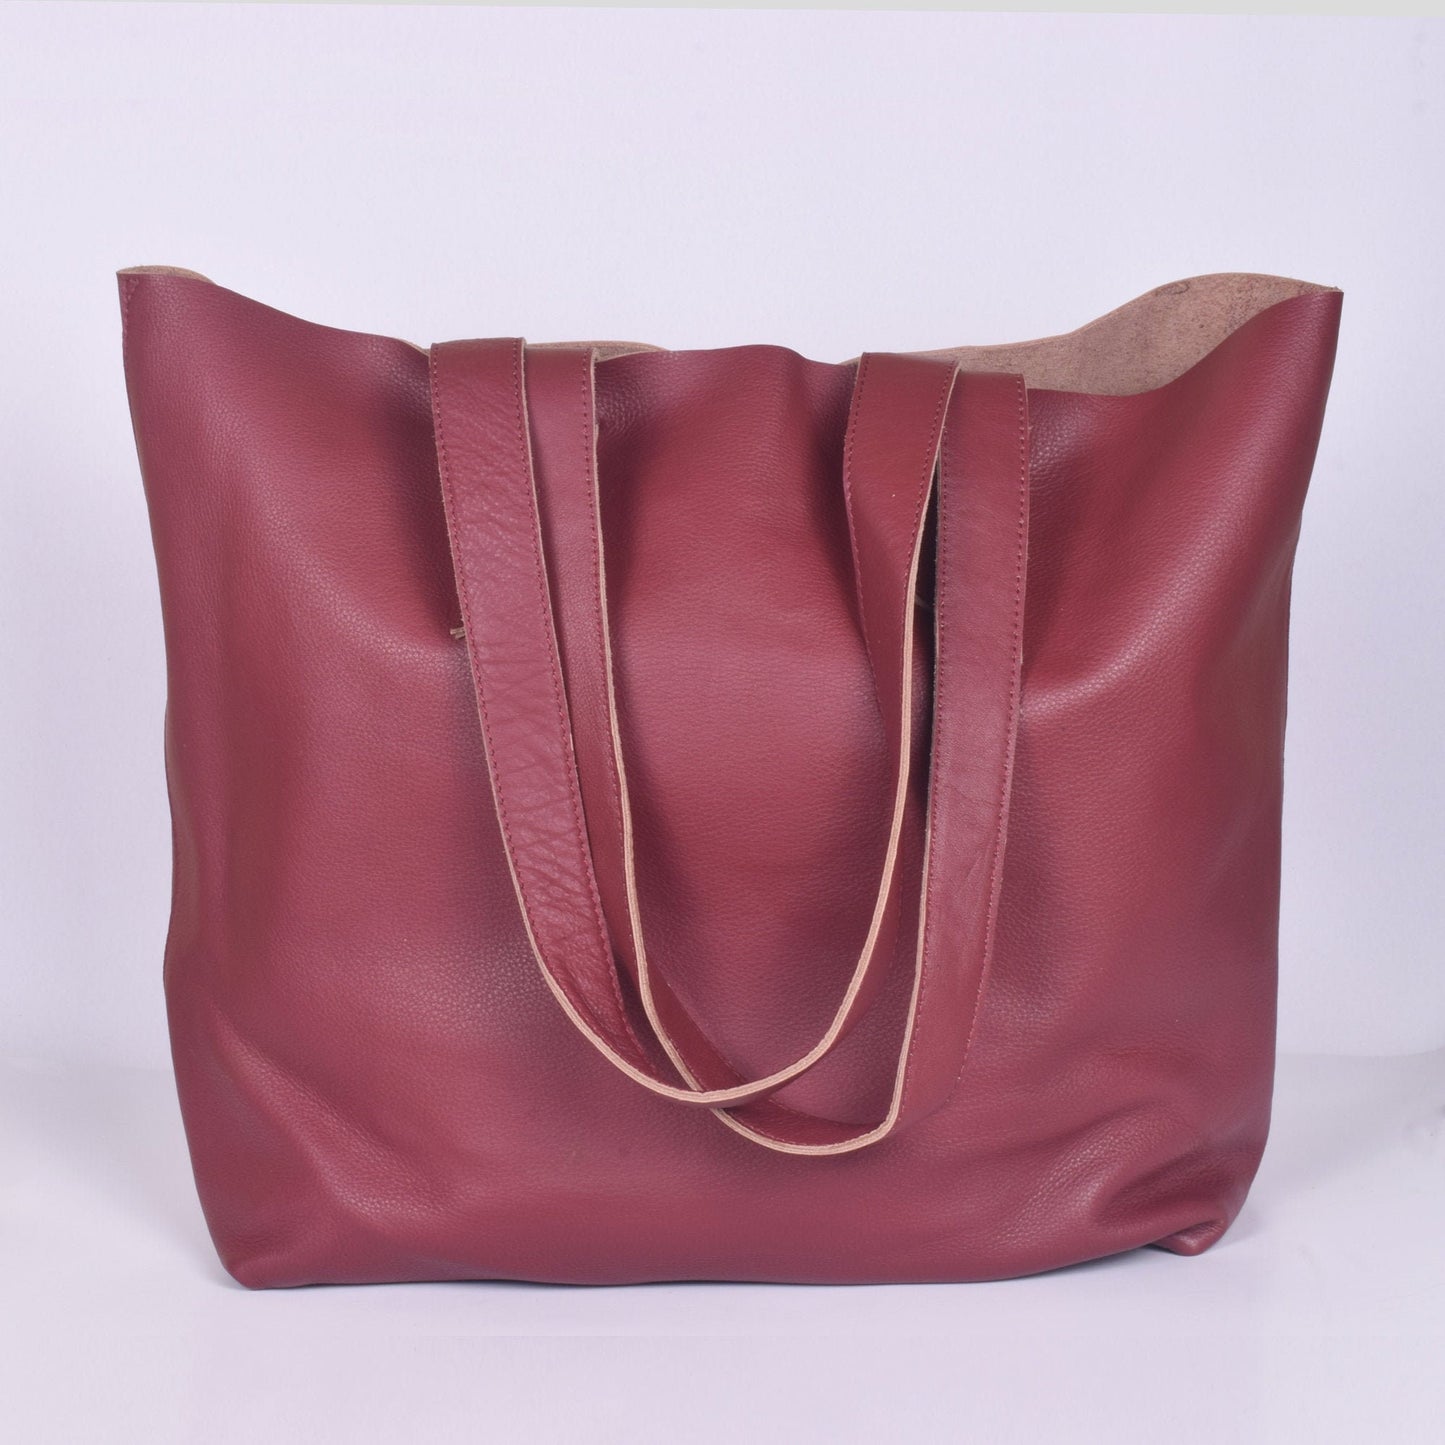 Maroon Leather Tote Bag for Women Raw Edge Shopper Purse Unlined Bag Leather Shoulder Bag Large Marketing Bag Everyday Tote Bag Leather